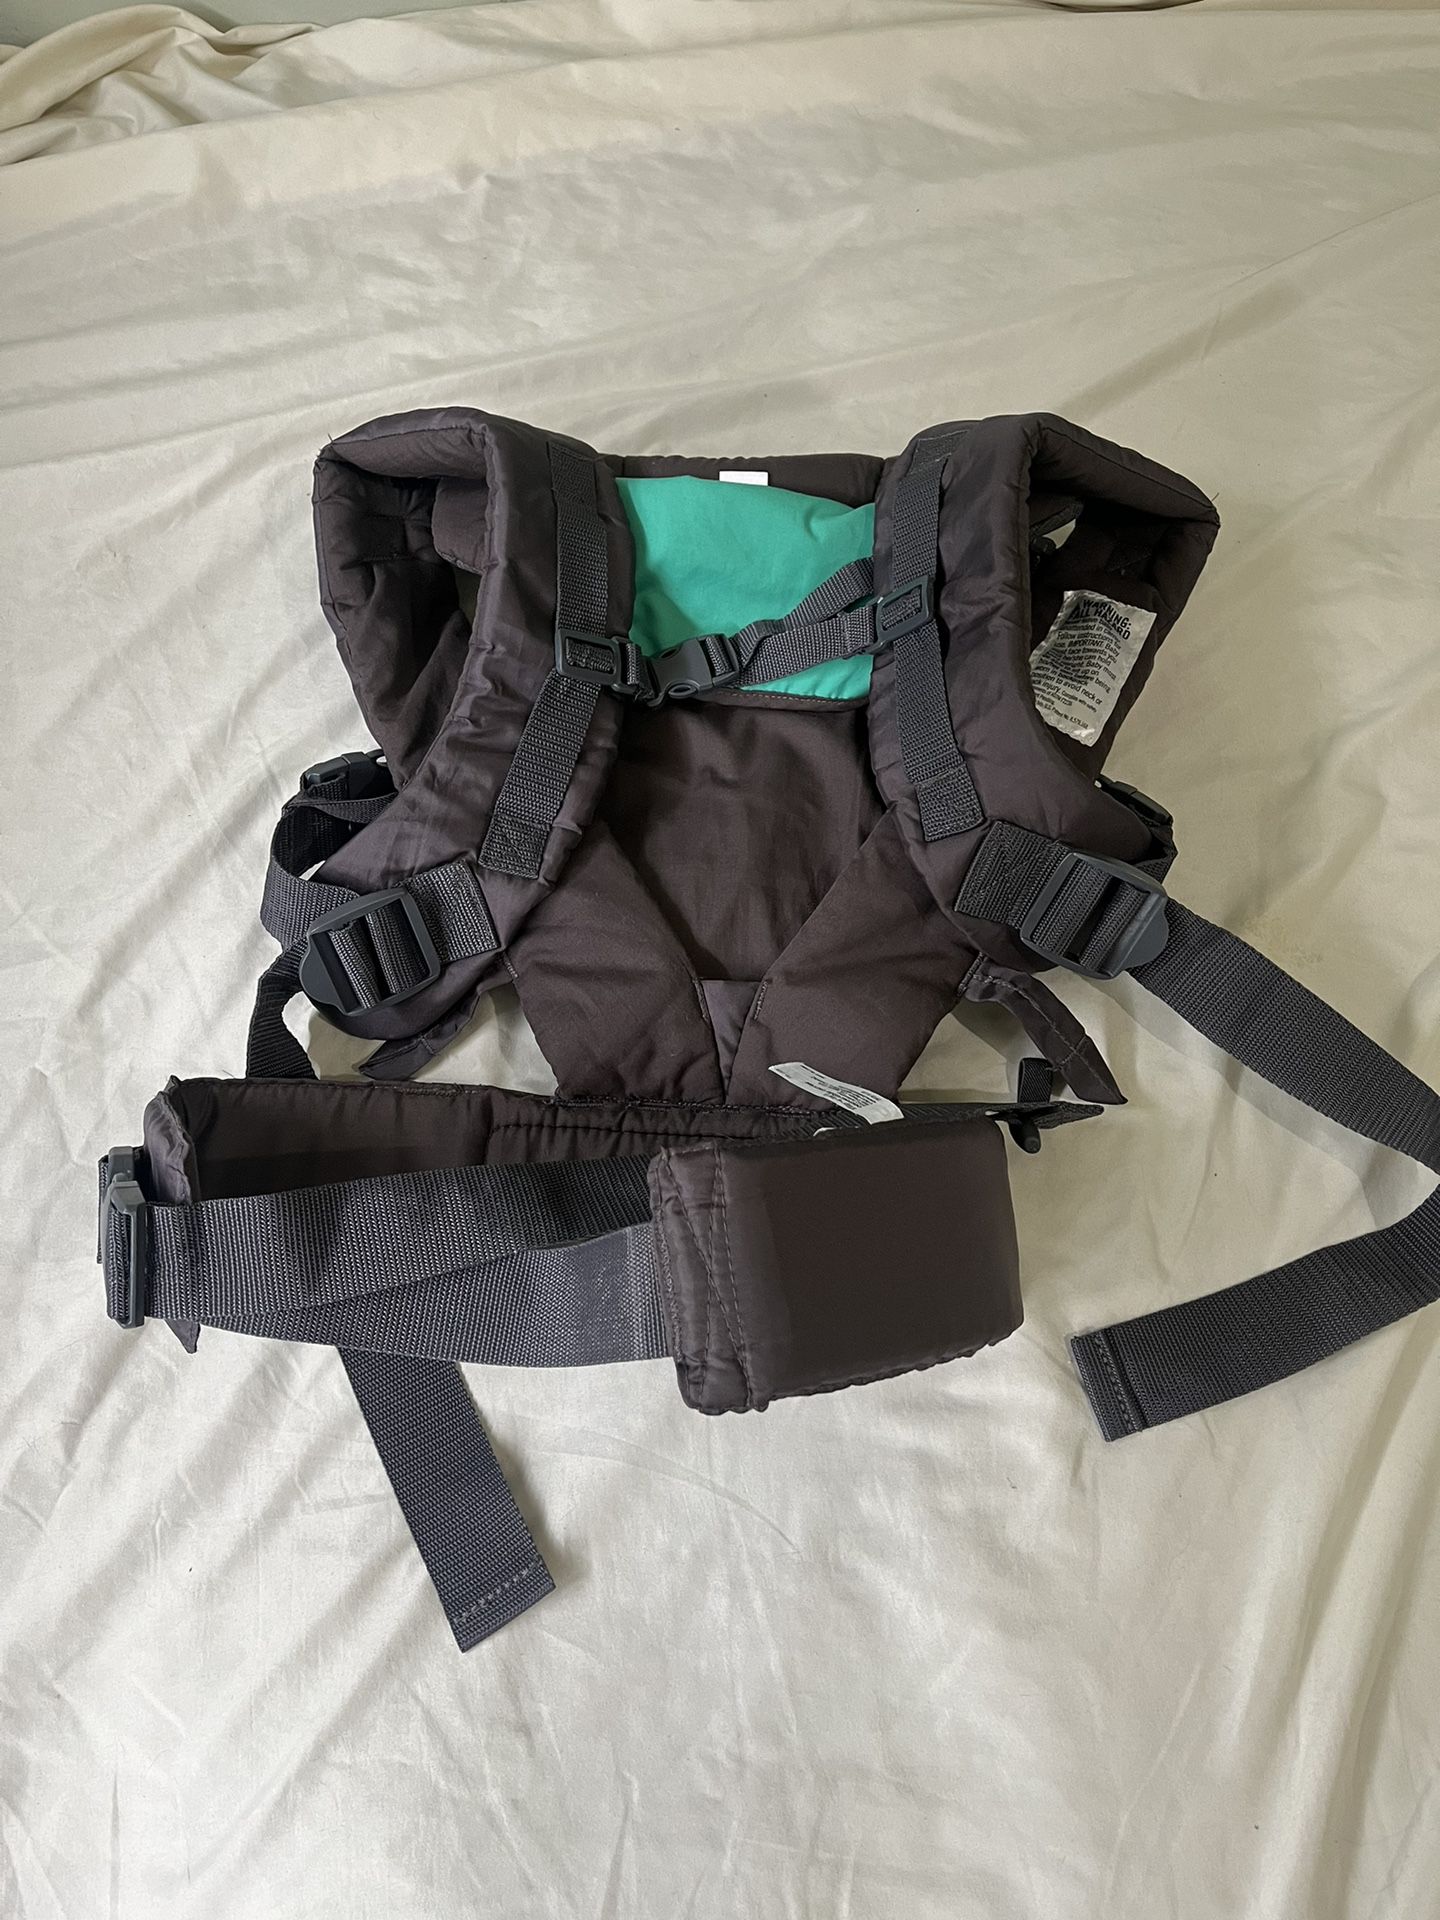 Infection Baby Flip 4 In 1 Convertible Carrier